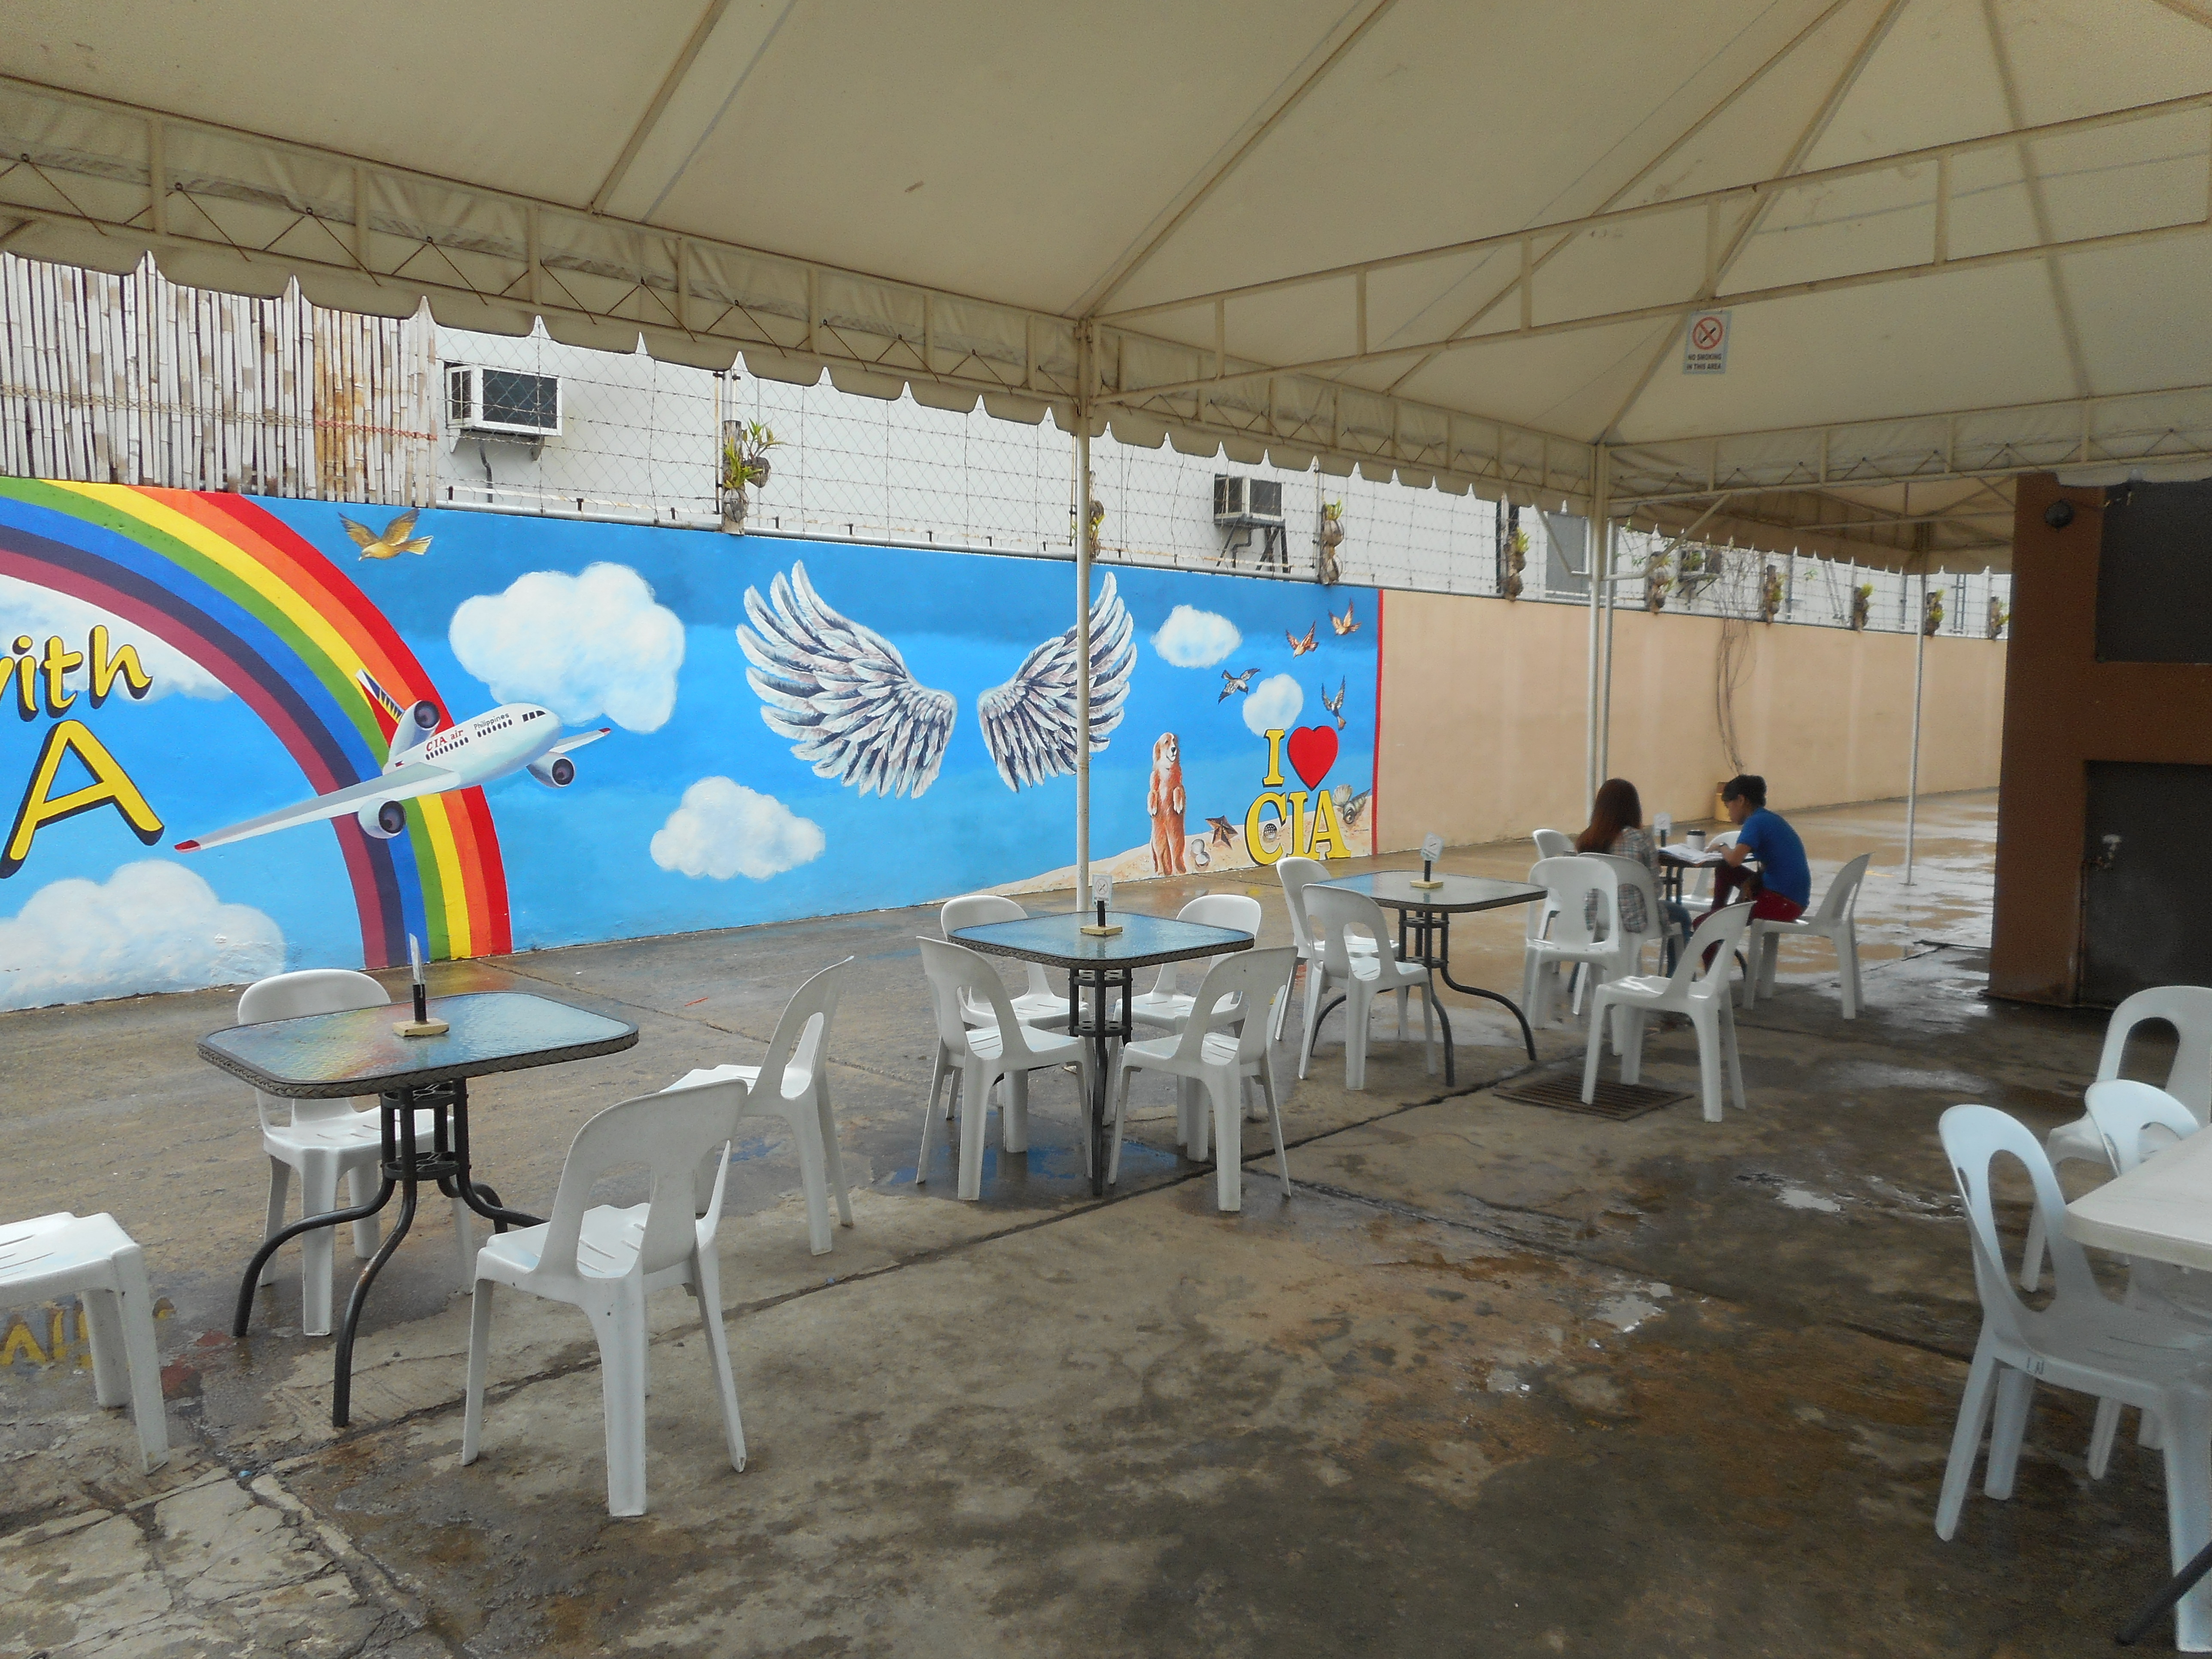 Another venue for students to relax and enjoy the outside breeze.